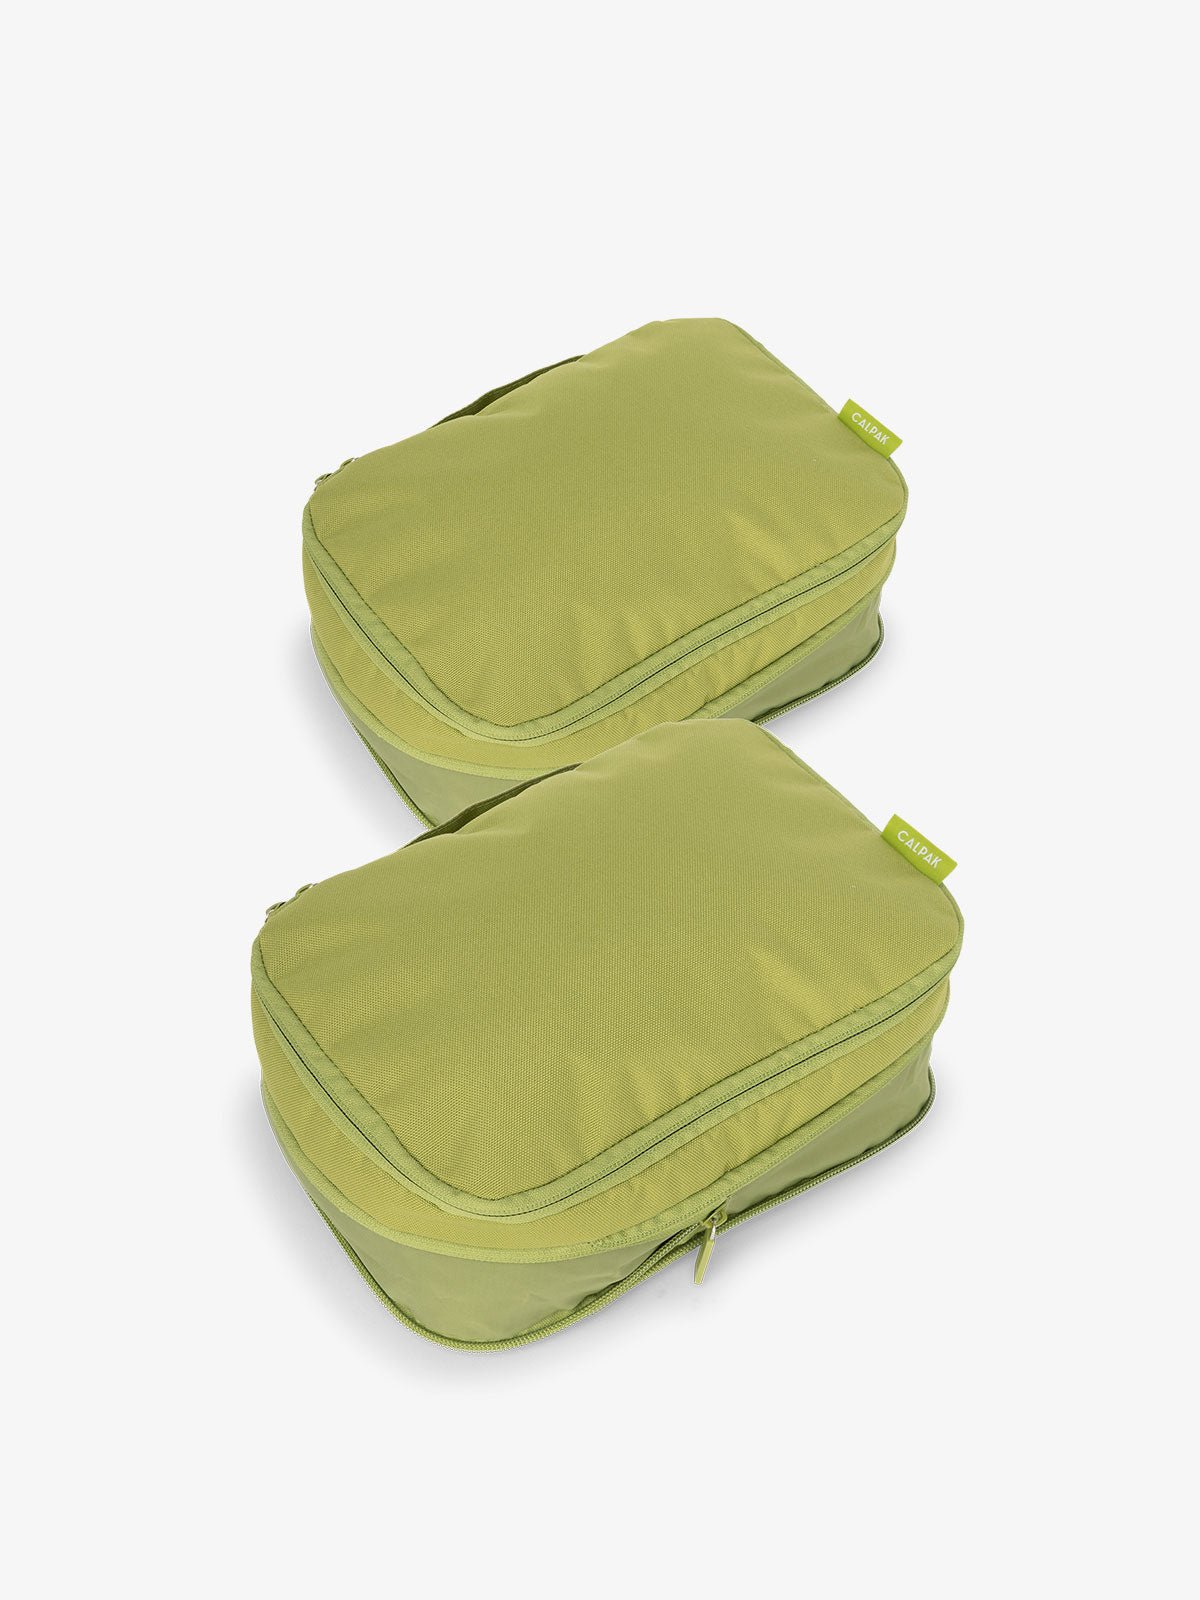 CALPAK small compression packing cubes with top handles and expandable by 4.5 inches in green